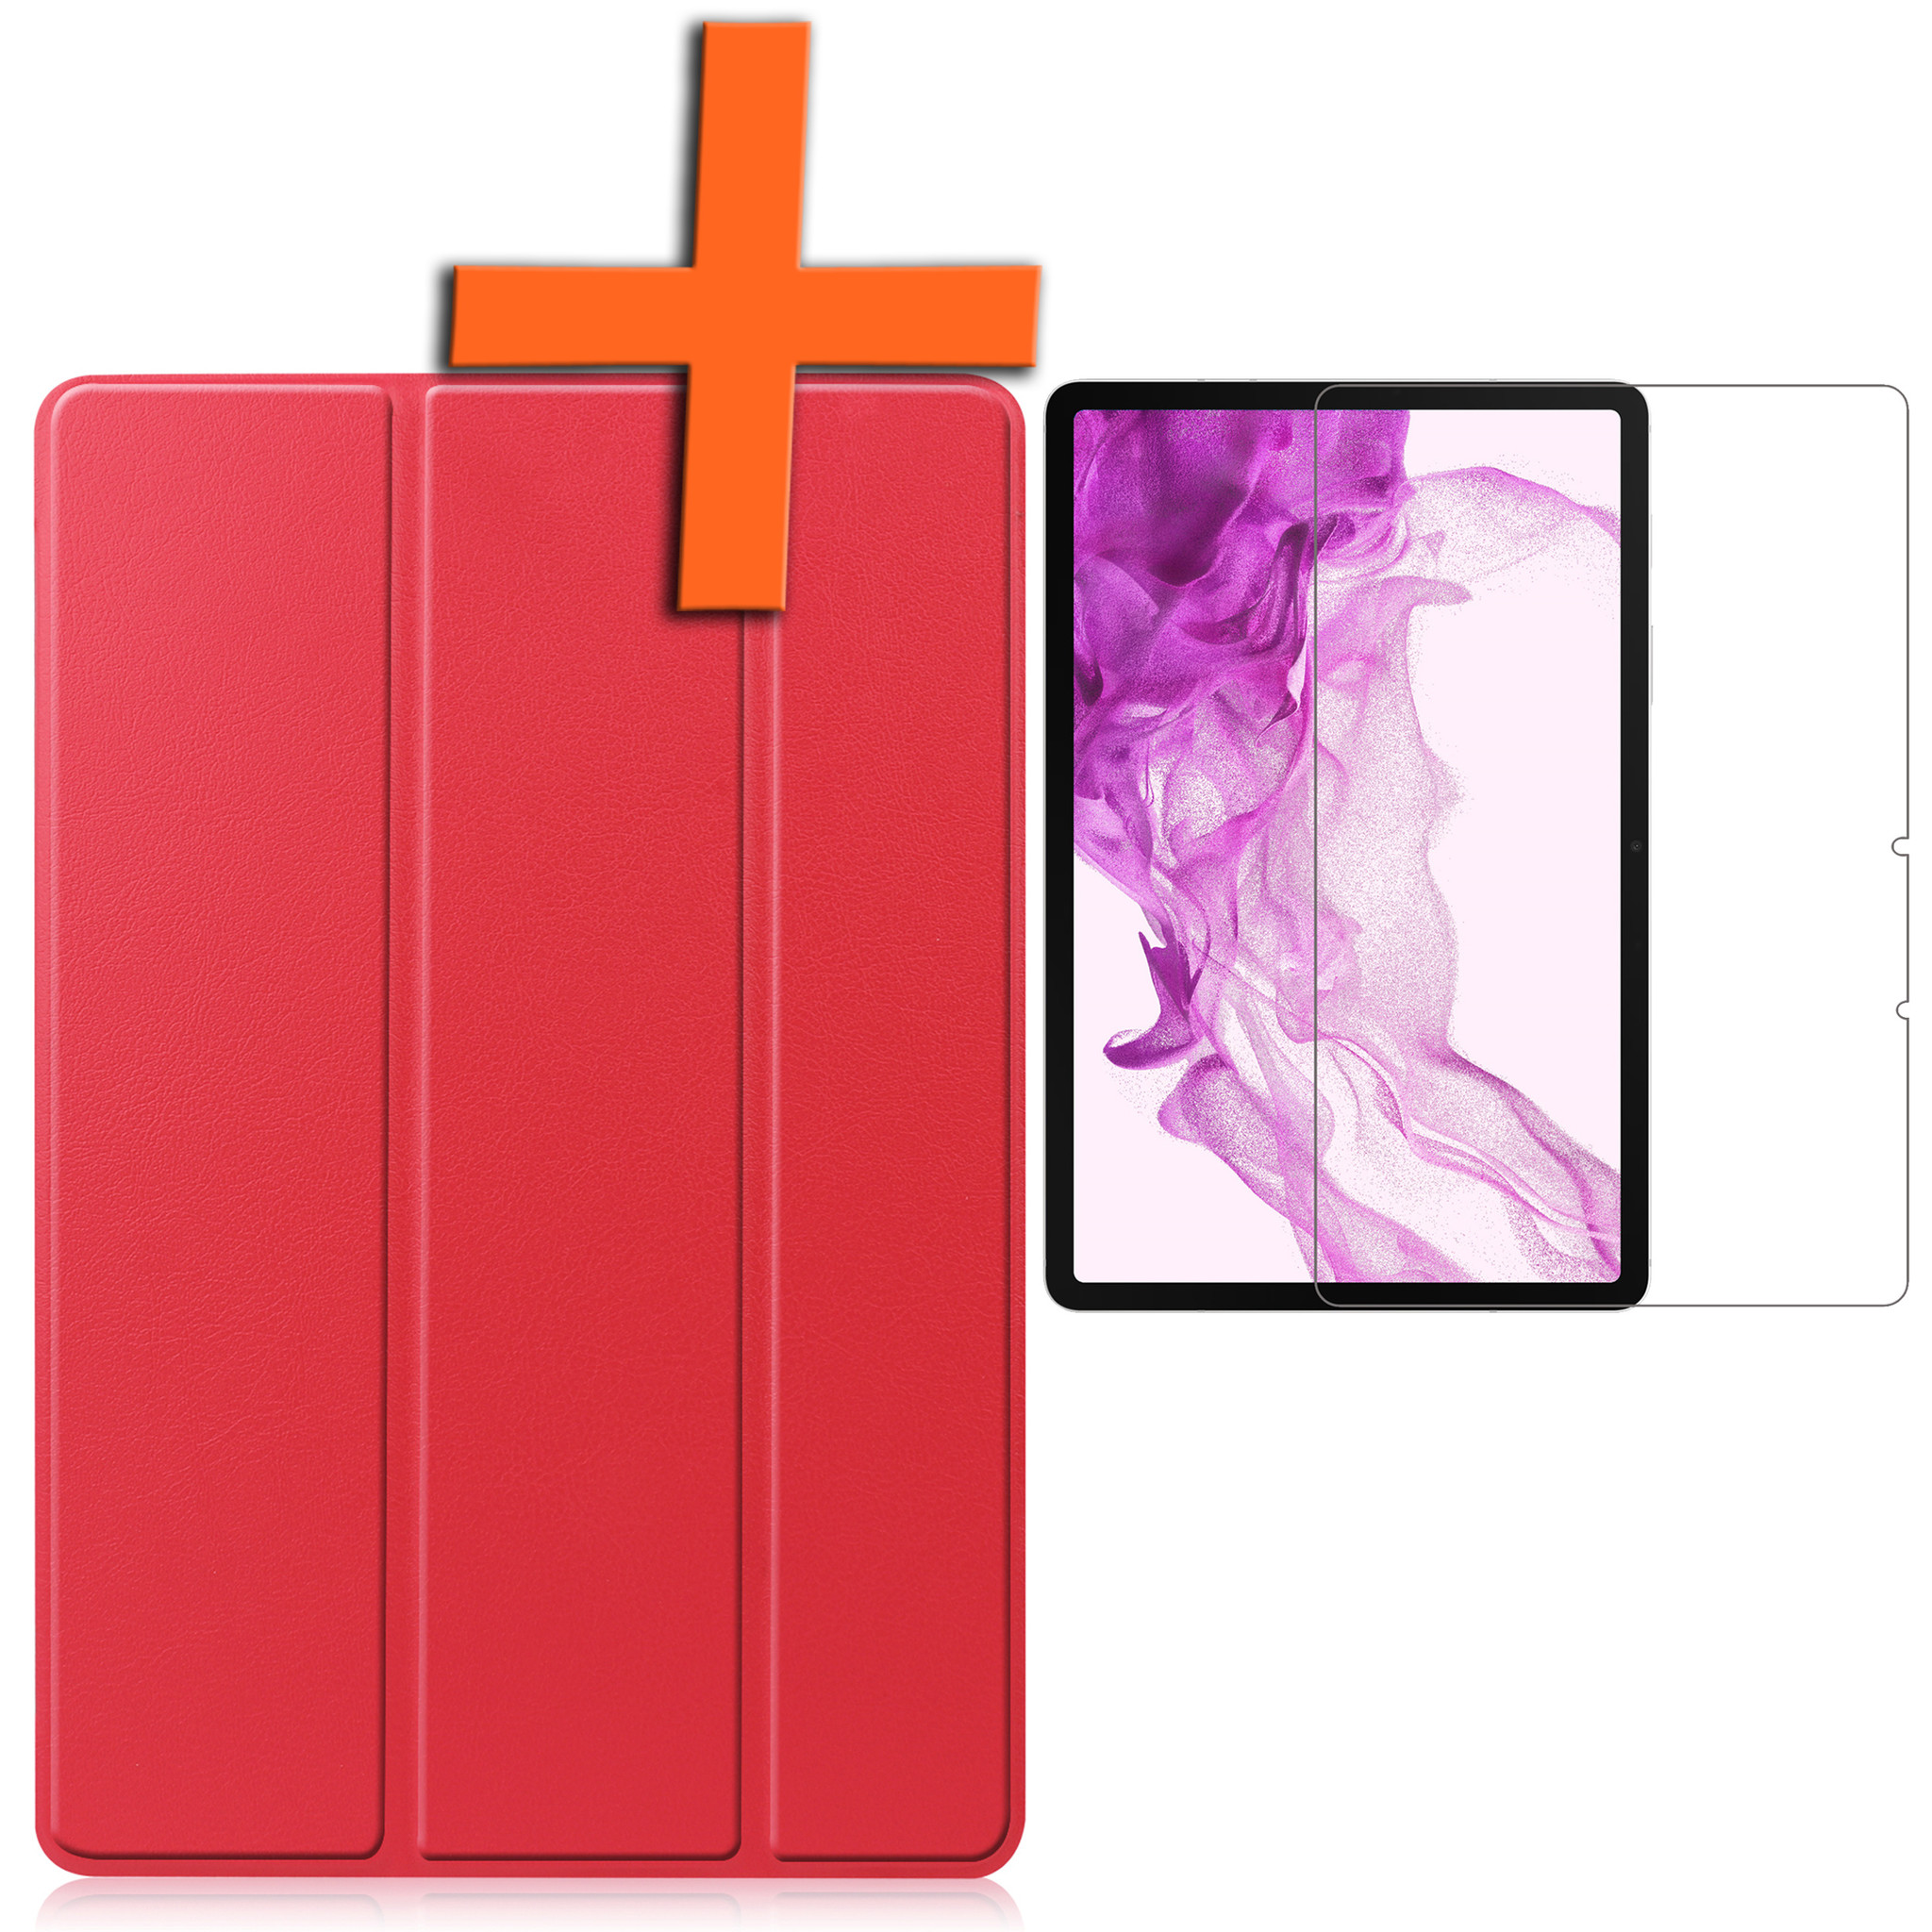 Samsung Galaxy Tab S8 Hoesje 11 inch Case Rood - Samsung Galaxy Tab S8 Hoes Hardcover Hoesje Bookcase Met Uitsparing S Pen - Rood